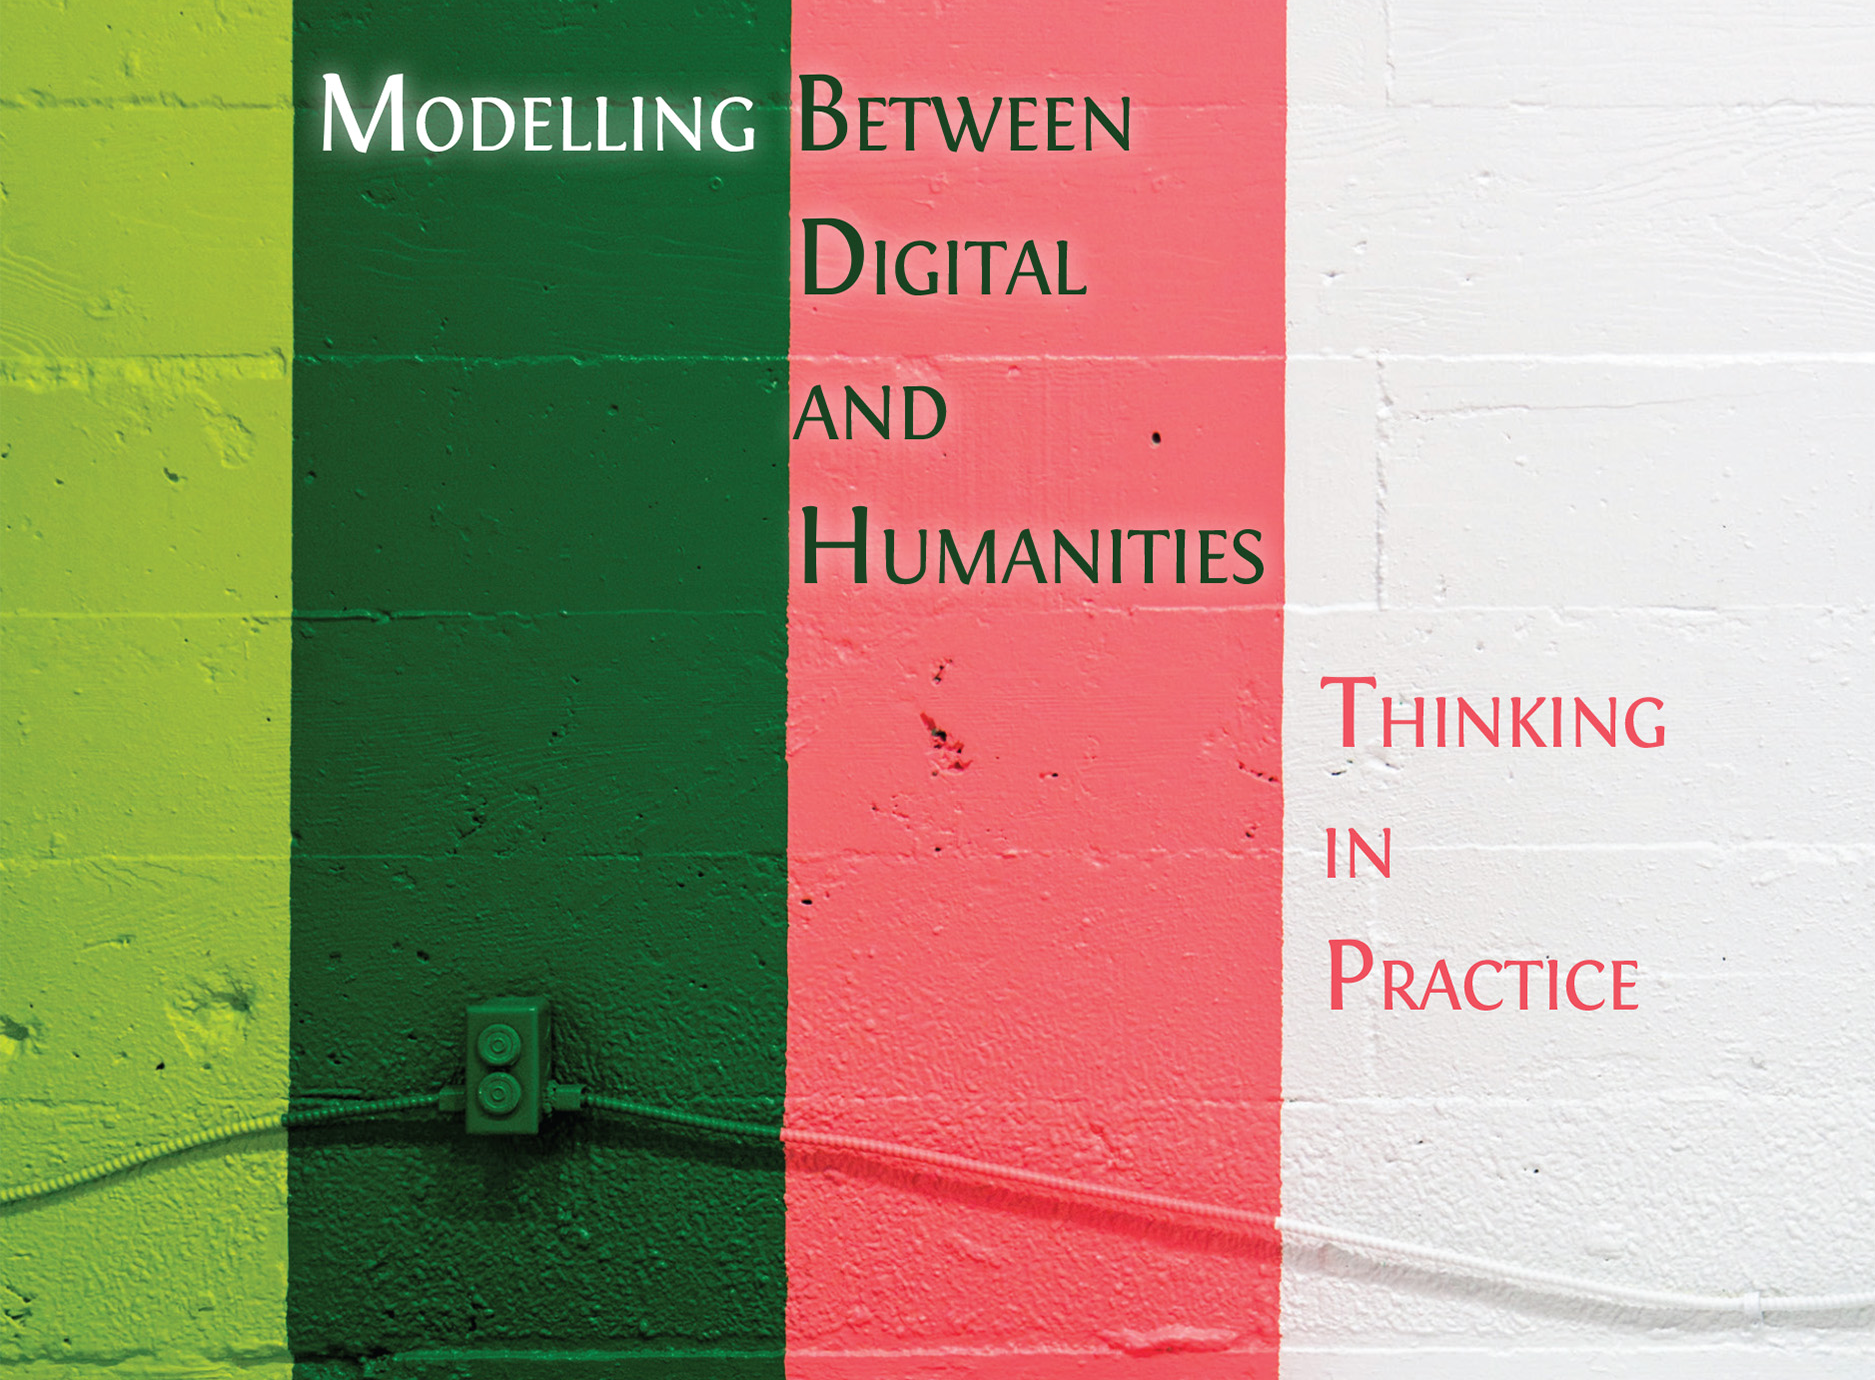 Cover of "Modelling Between Digital and Humanities : Thinking in Practice" (Arianna Ciula, Øyvind Eide, Cristina Marras & Patrick Sahle)